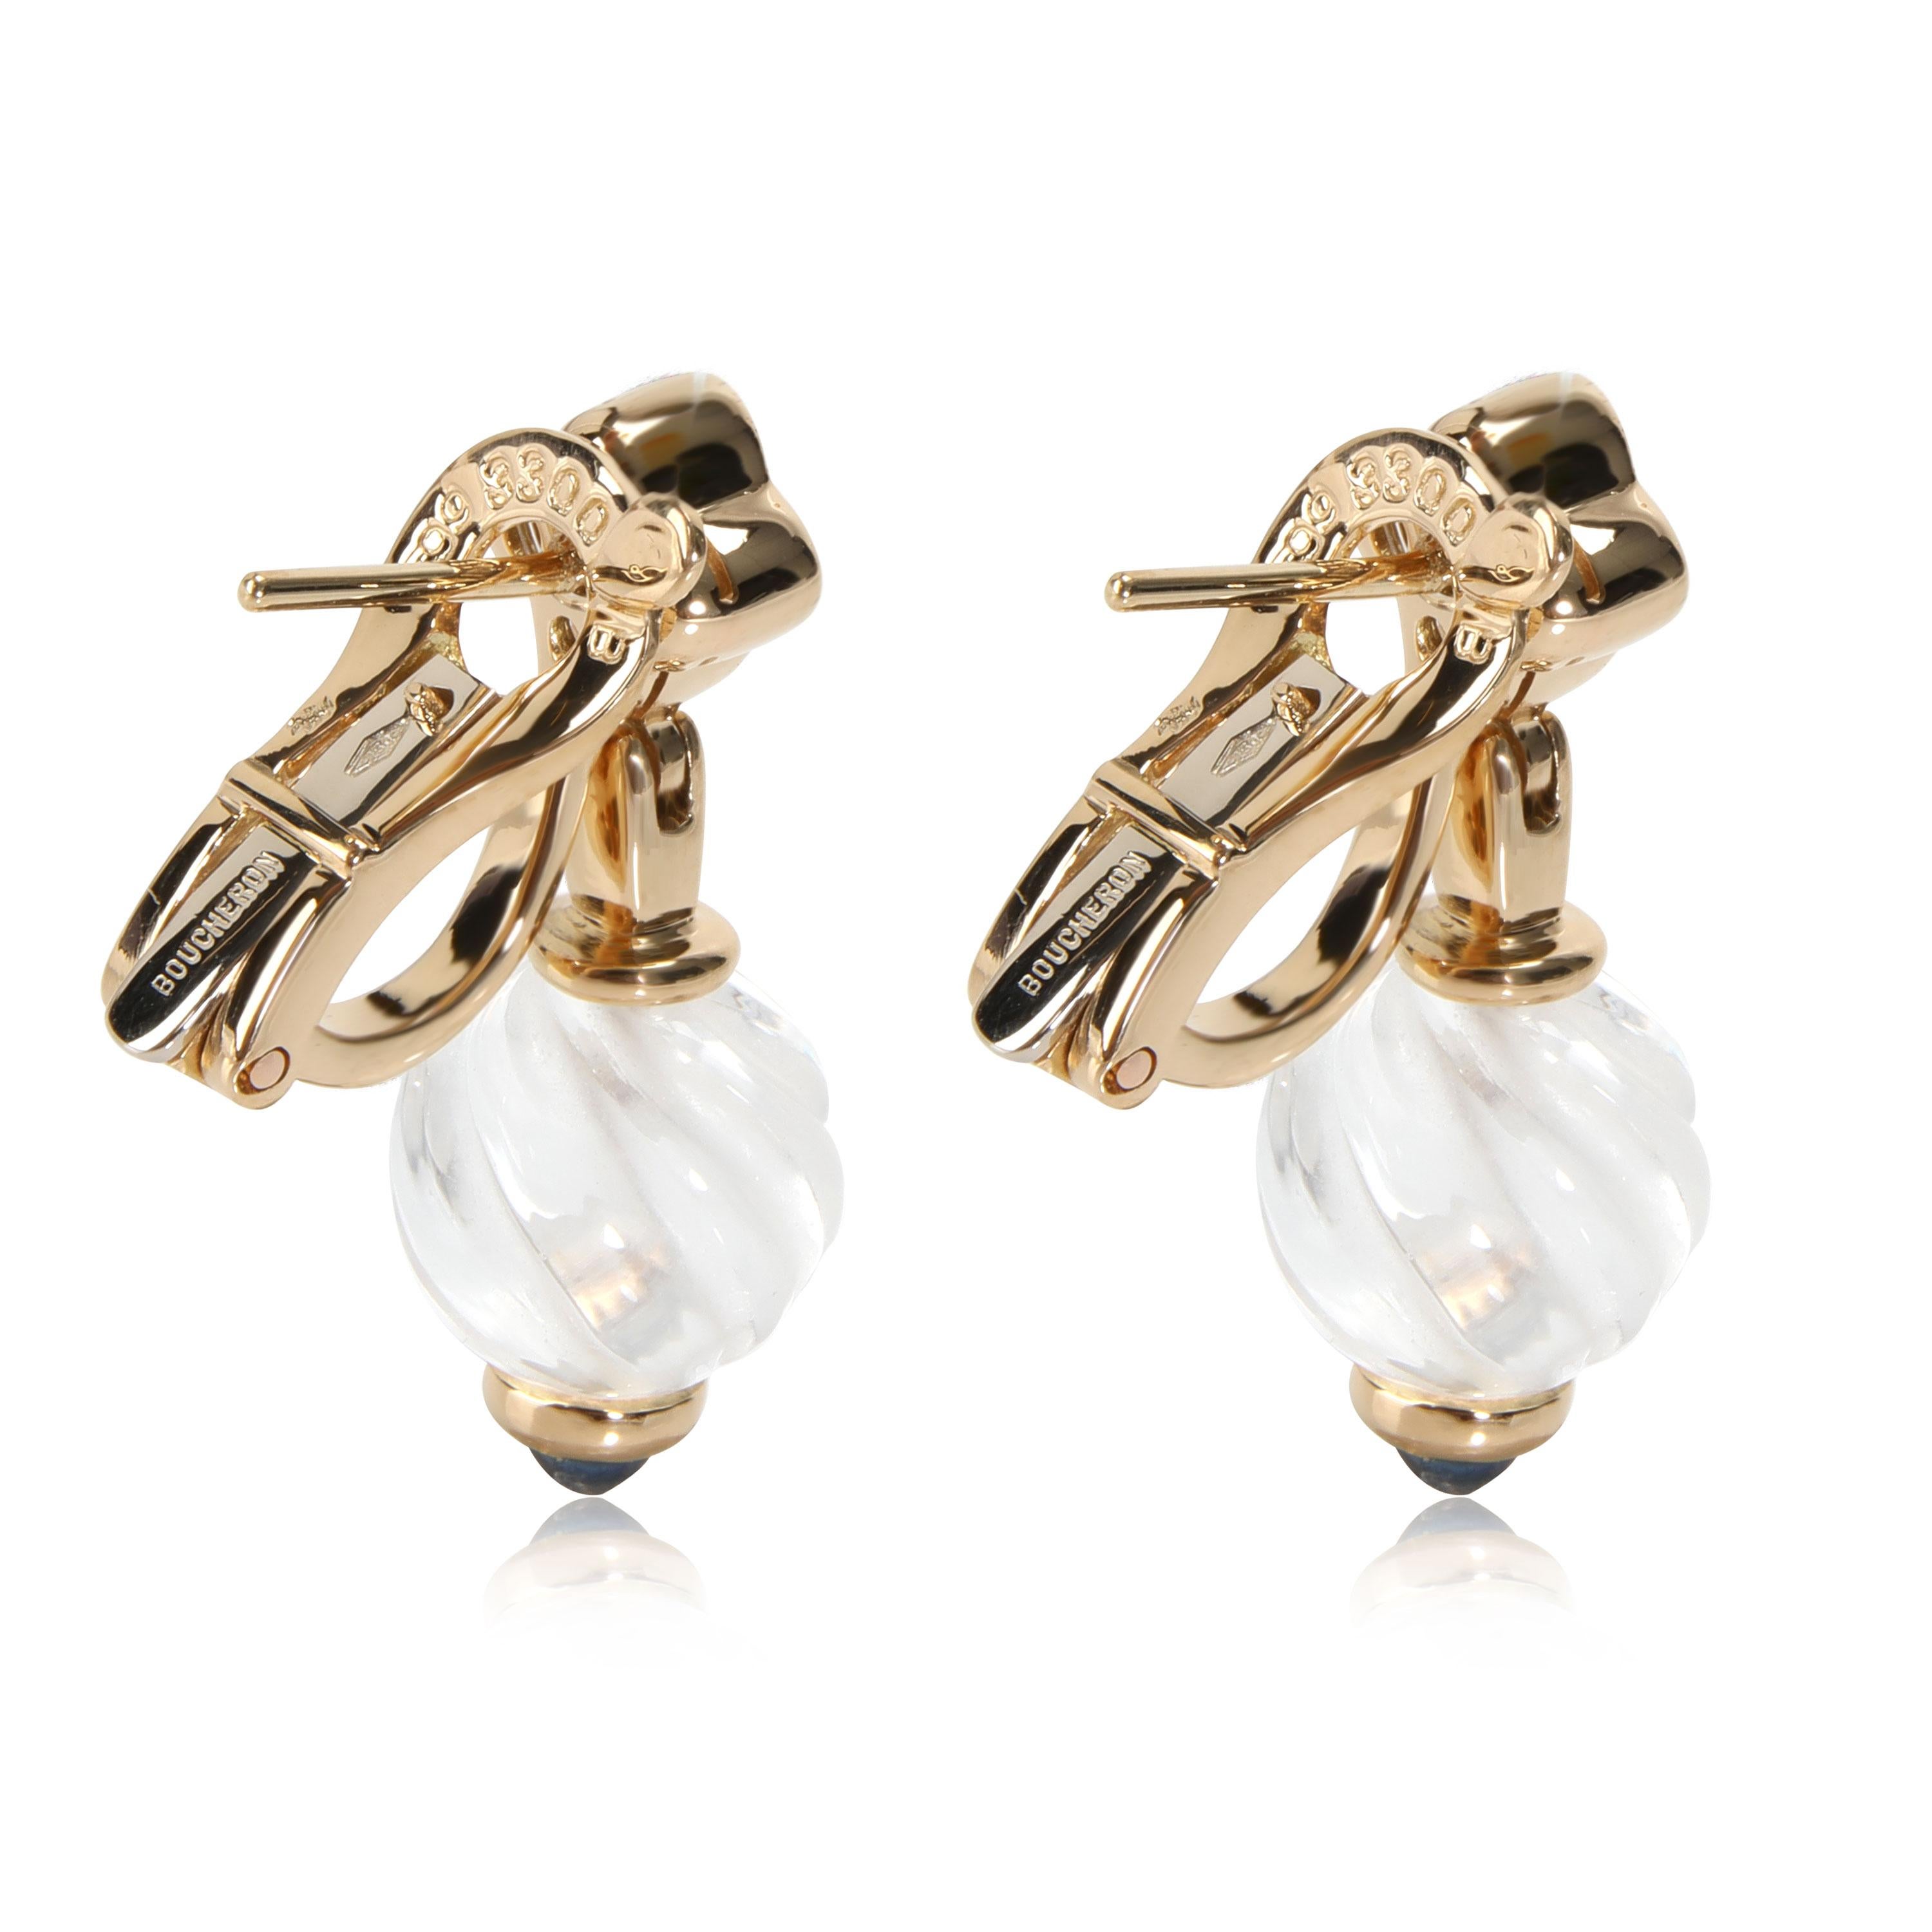 Boucheron Carved Rock Crystal & Diamond Earrings in 18K Yellow Gold 0.4 CTW

PRIMARY DETAILS
SKU: 112135
Listing Title: Boucheron Carved Rock Crystal & Diamond Earrings in 18K Yellow Gold 0.4 CTW
Condition Description: Retails for 9000 USD. In